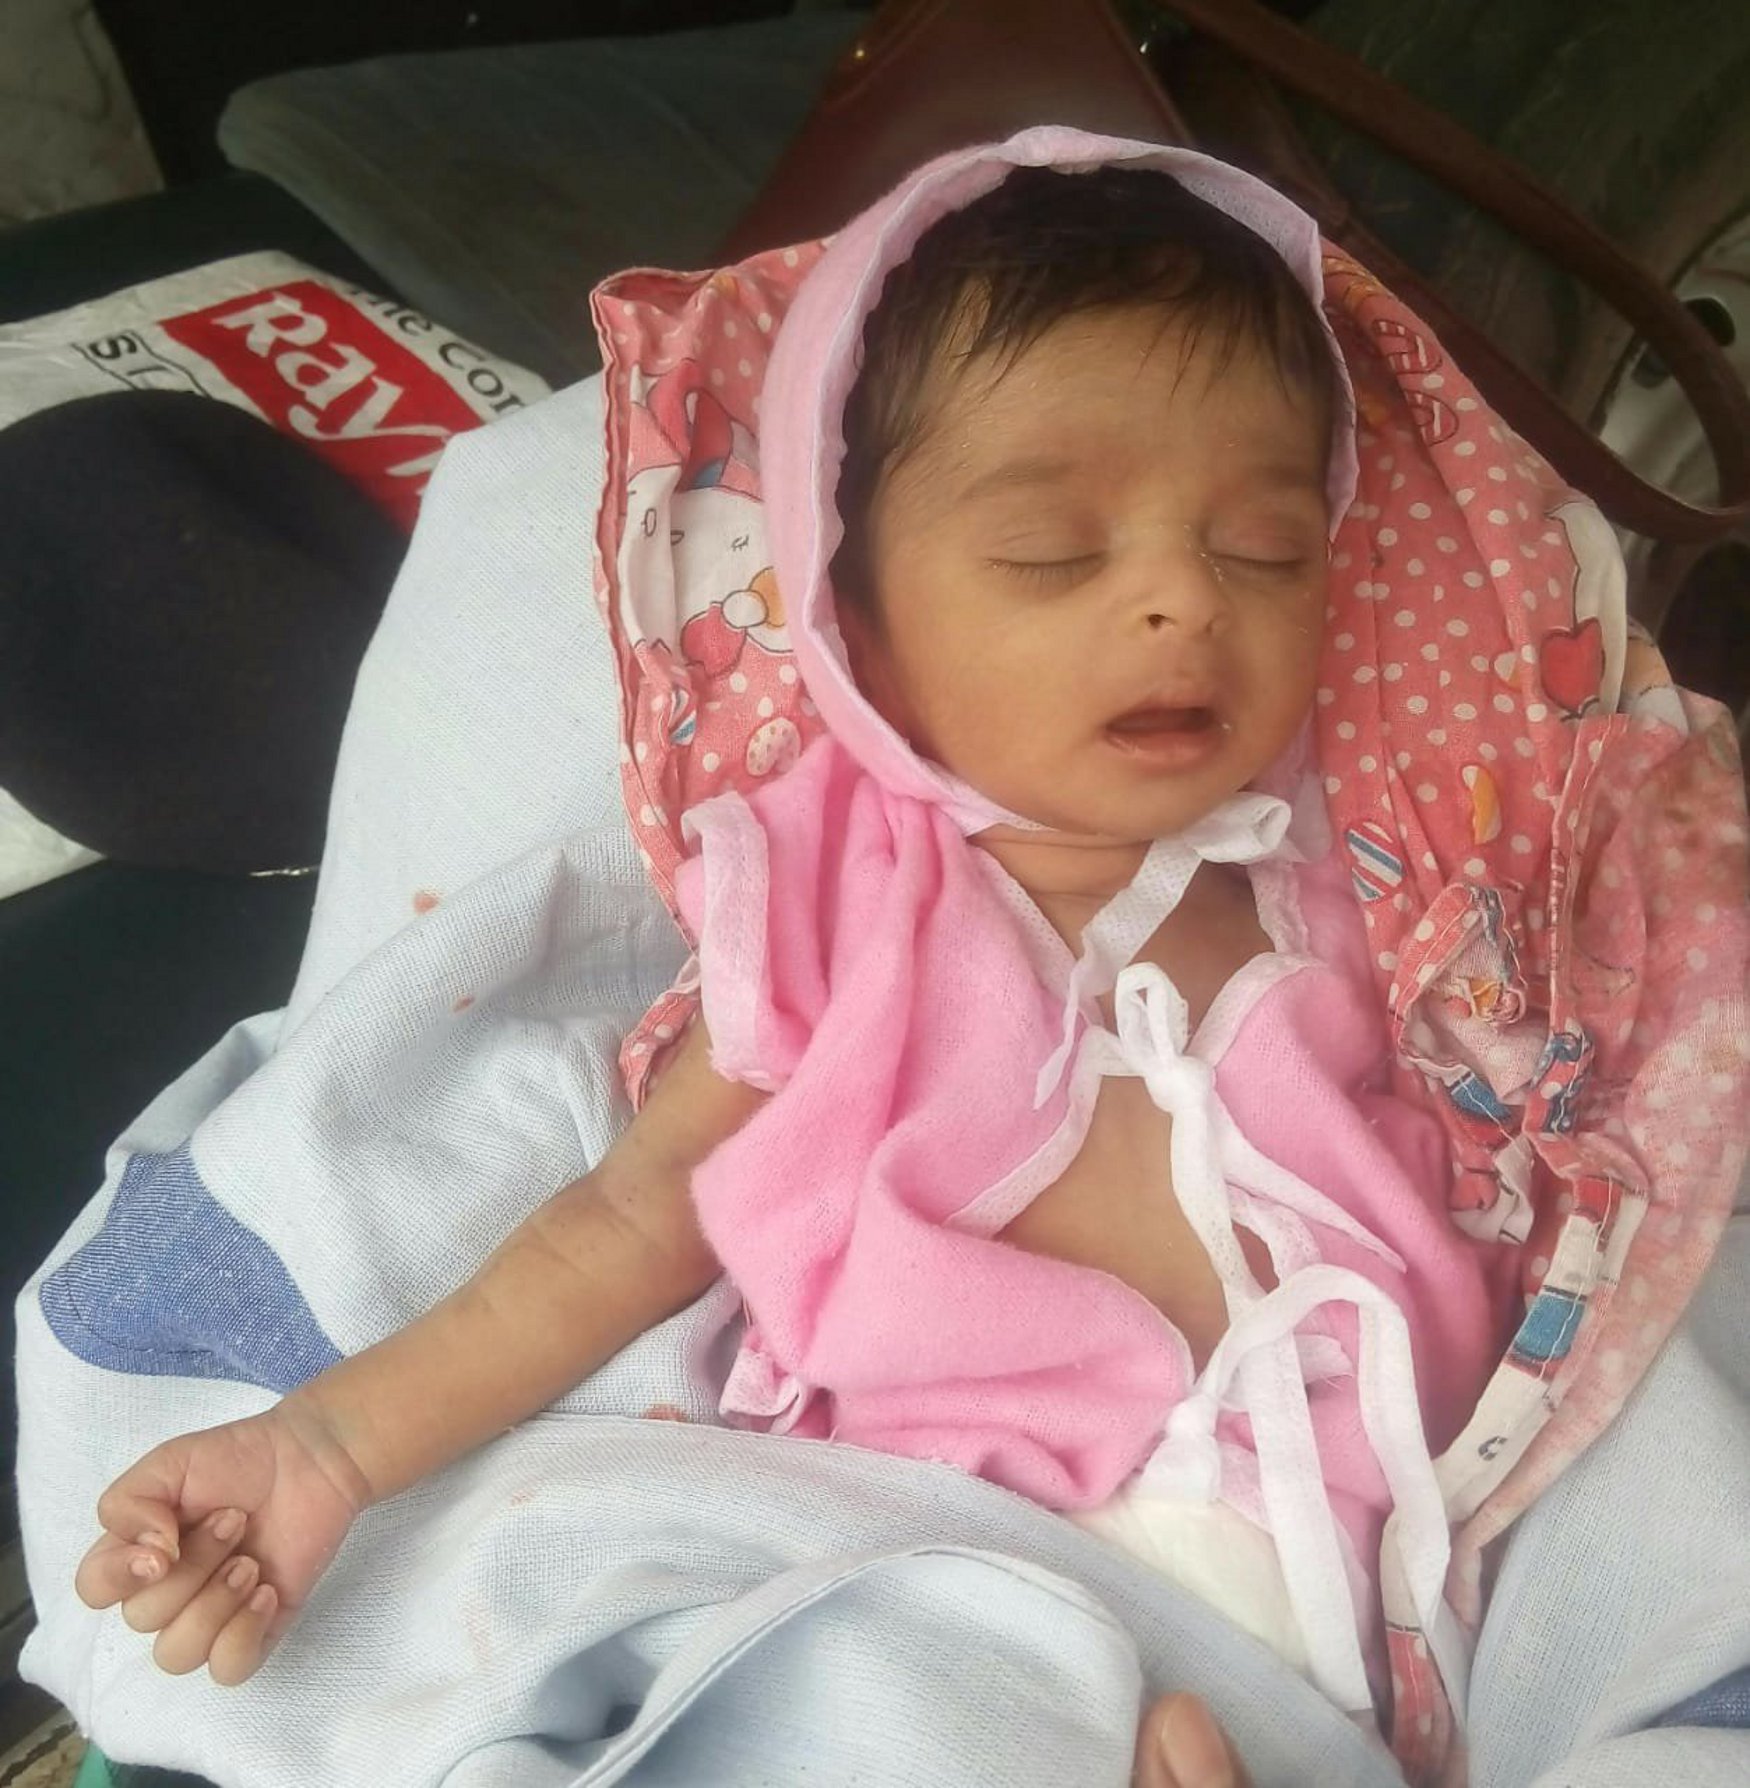 Abandoned infant admitted to district hospital sent for care